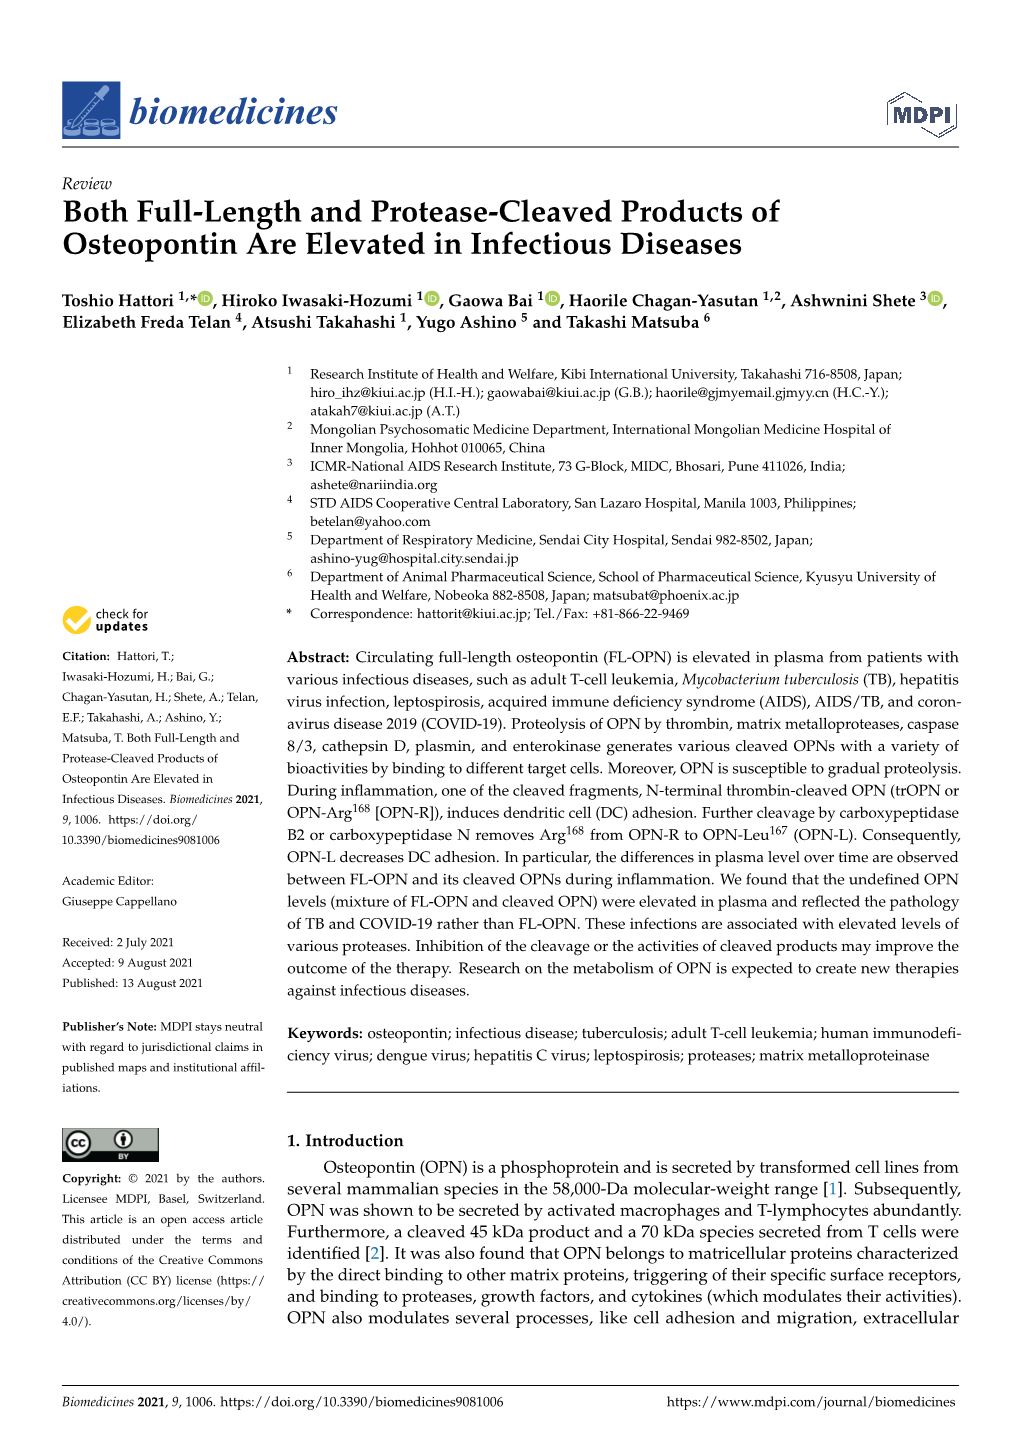 Both Full-Length and Protease-Cleaved Products of Osteopontin Are Elevated in Infectious Diseases